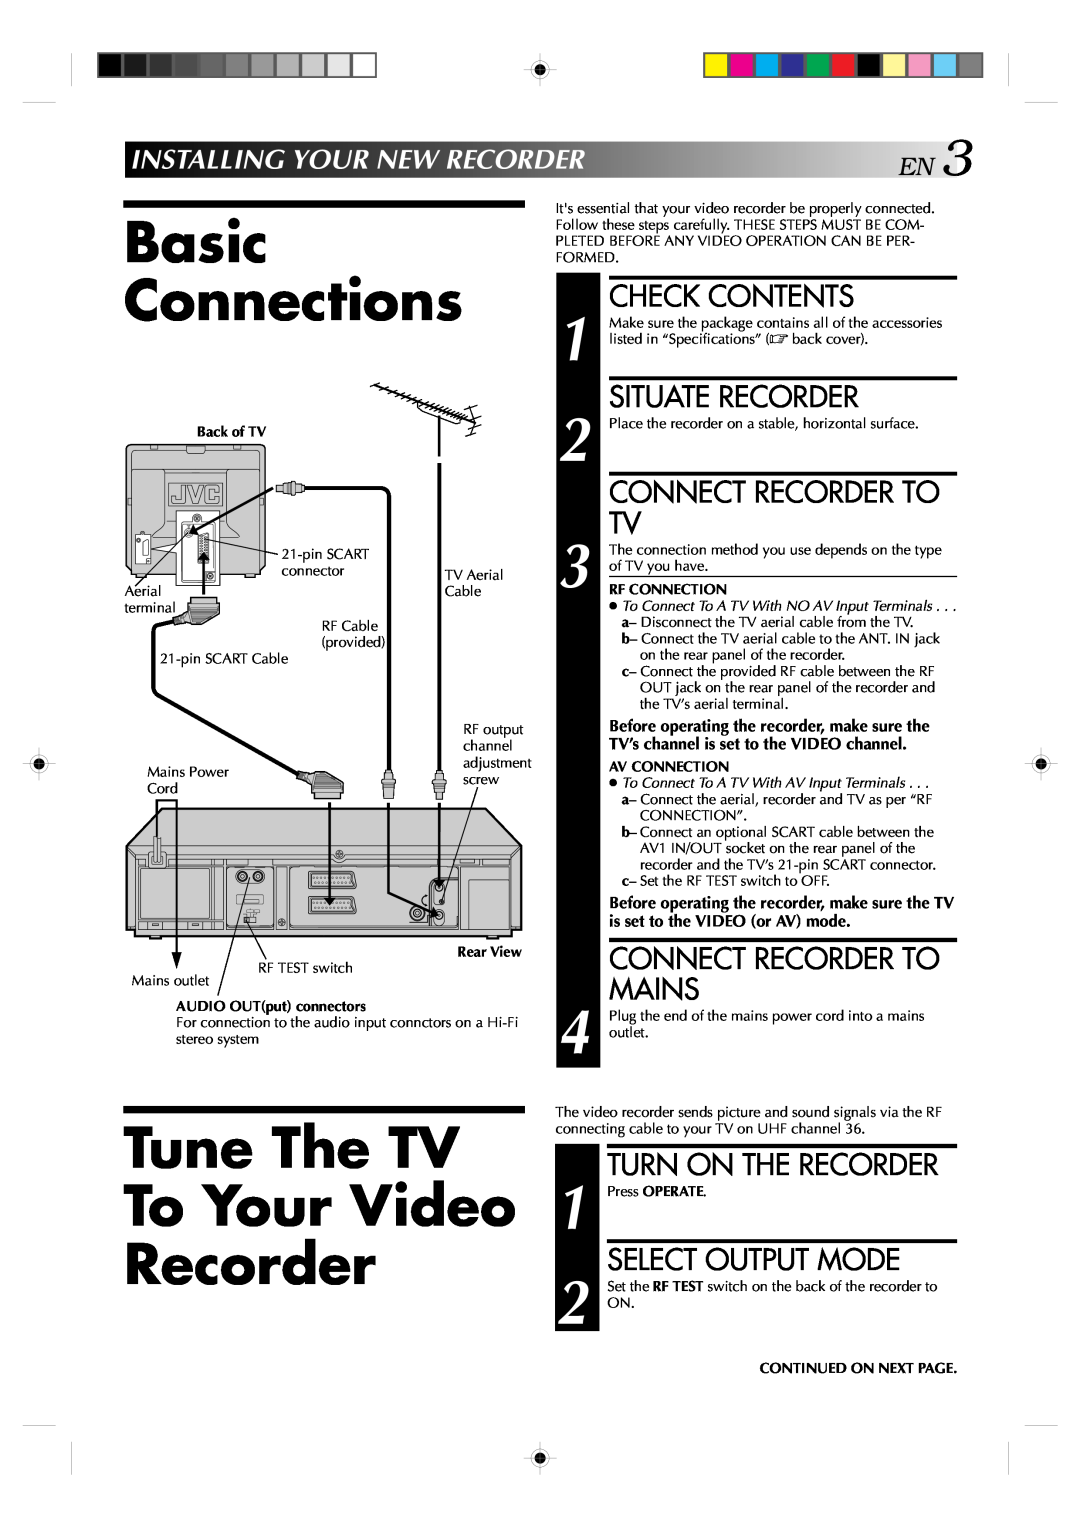 JVC HR-J638E/EH Basic Connections, Tune The TV To Your Video Recorder, Installingyournewrecorderen, Back of TV 